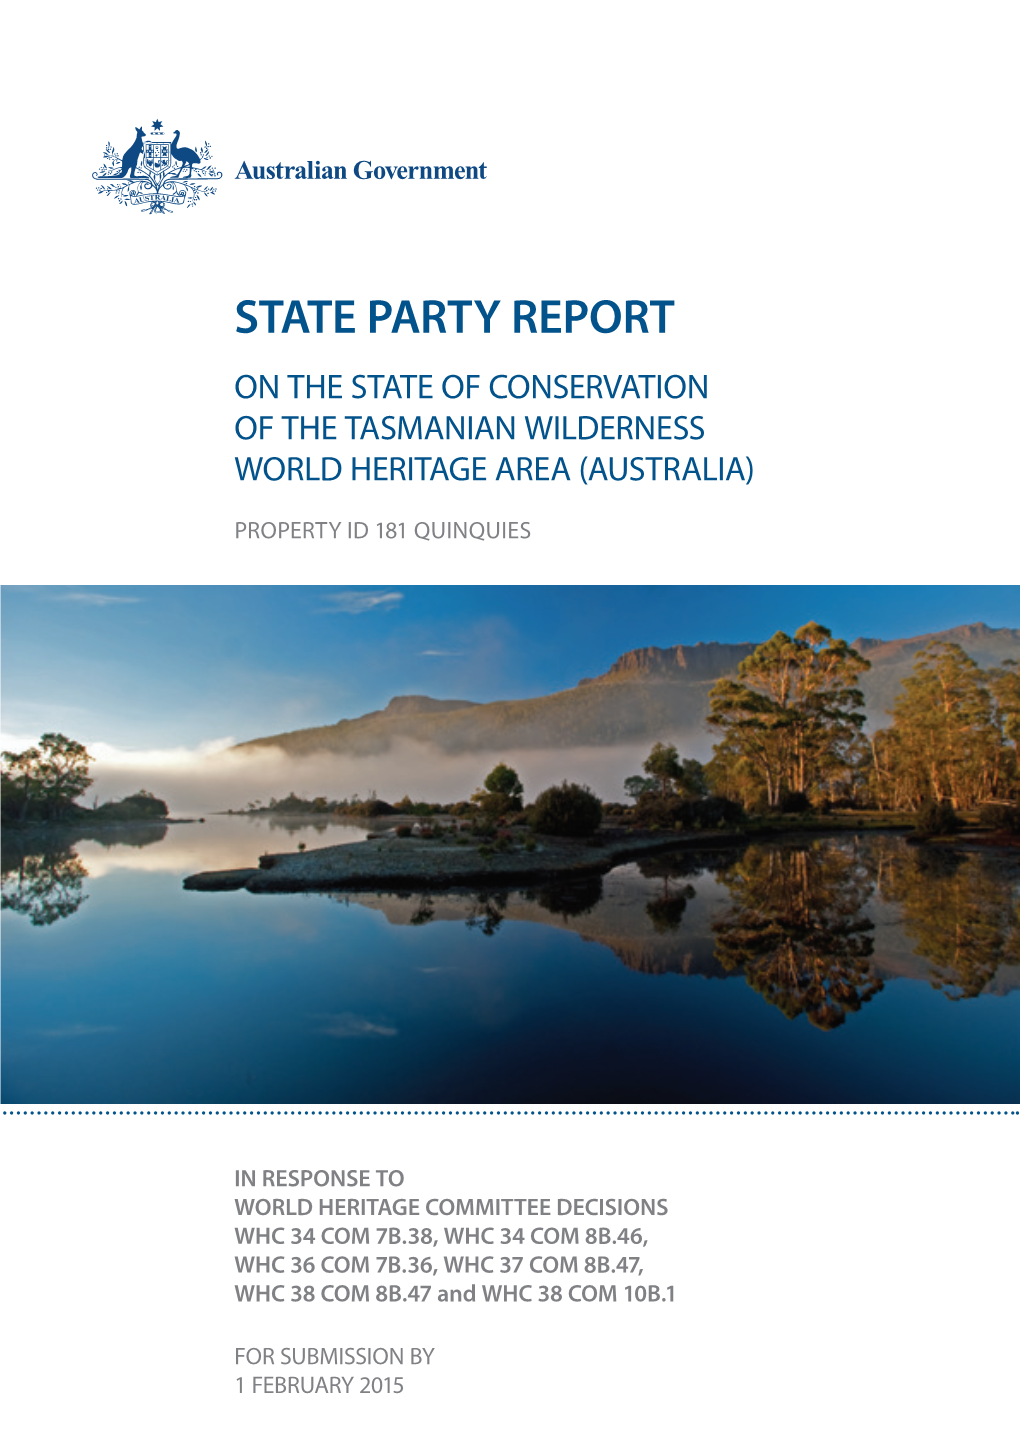 State Party Report on the State of Conservation of the Tasmanian Wilderness World Heritage Area (Australia)